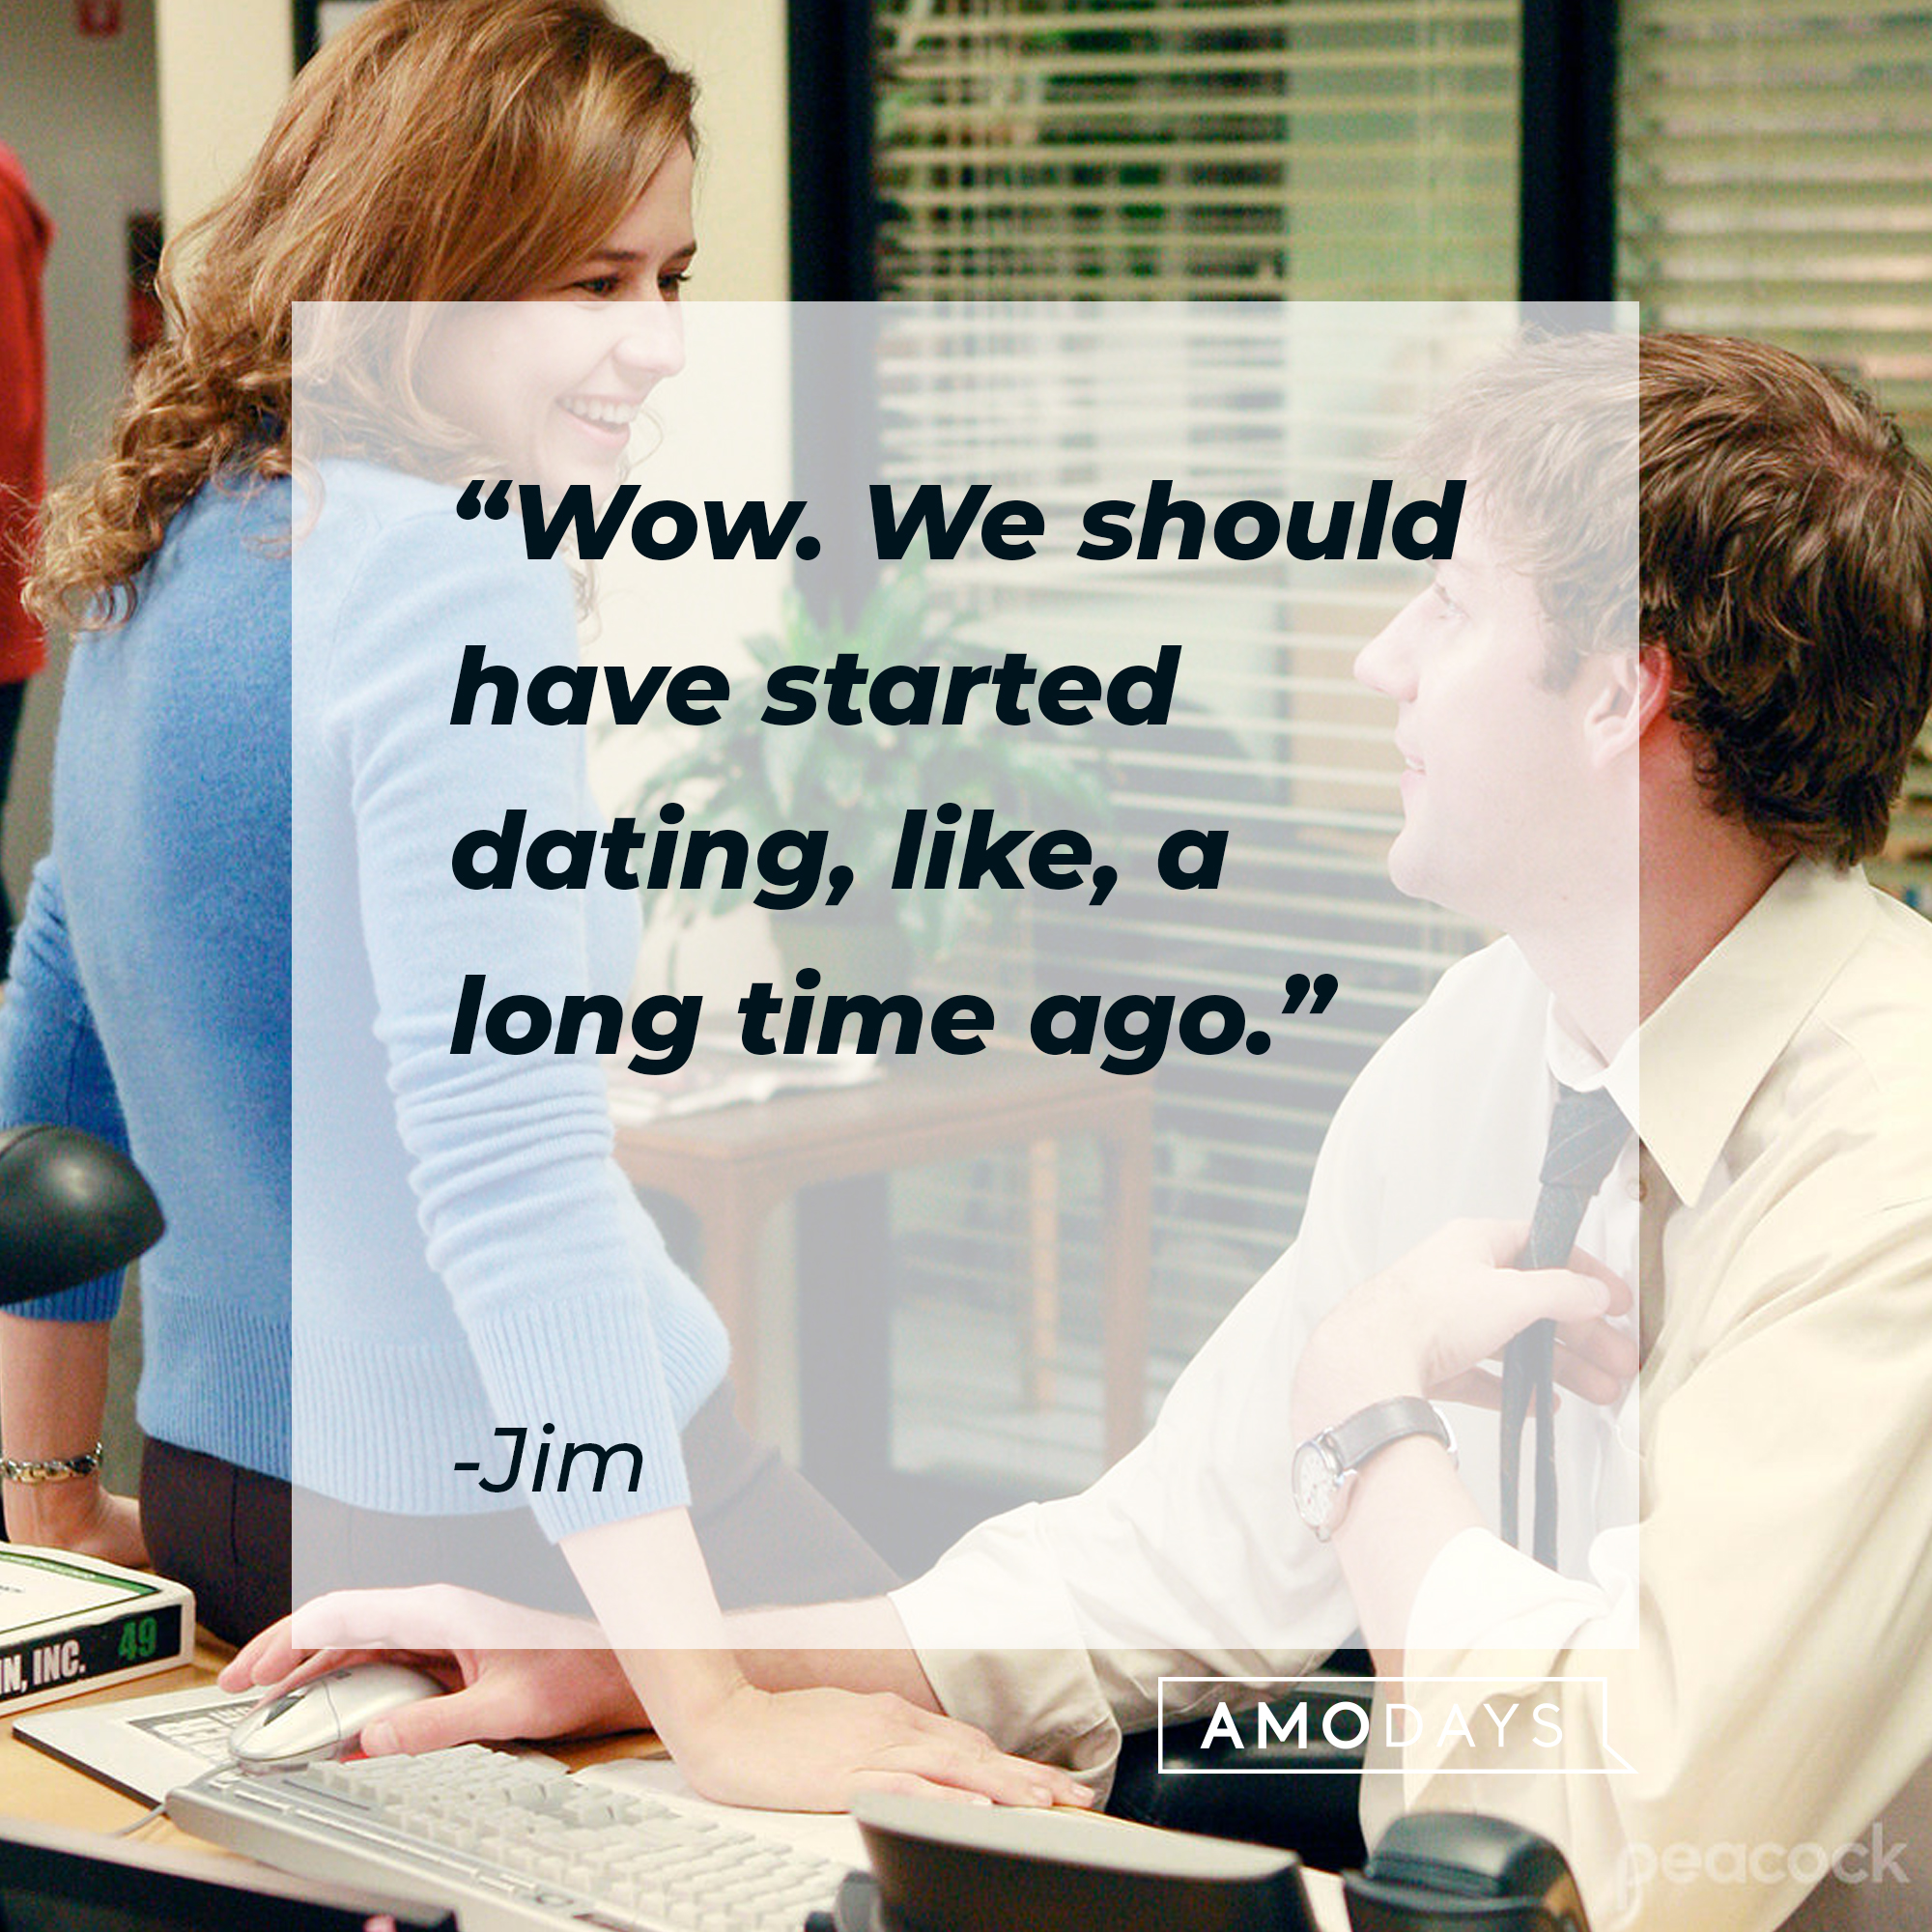 A photo of Pam and Jim with the quote, "Wow. We should have started dating, like, a long time ago." | Source: Facebook/TheOfficeTV